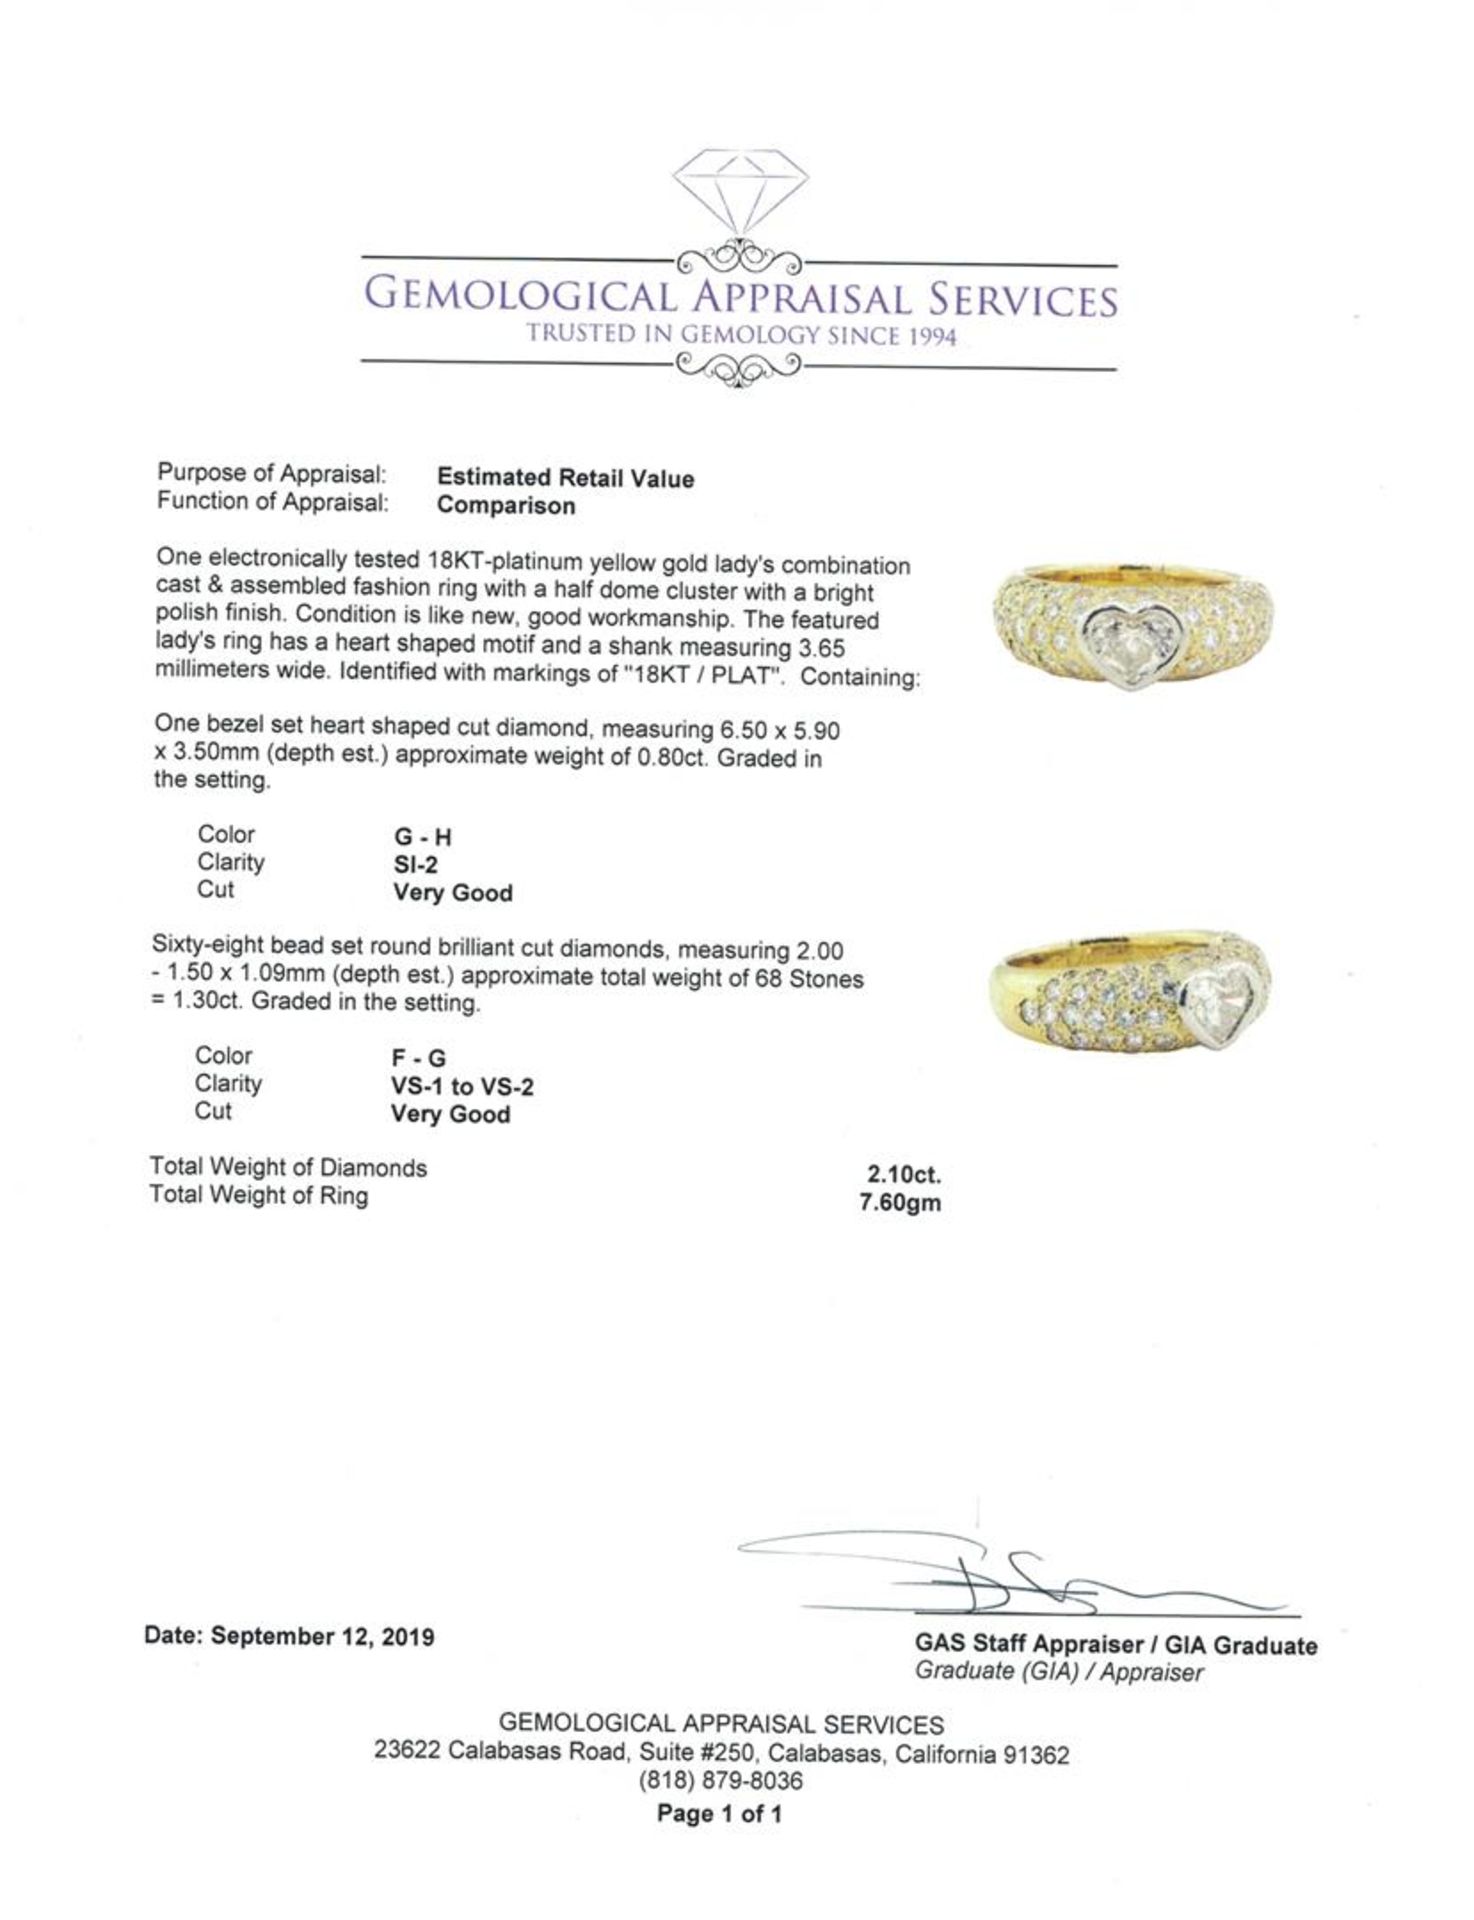 2.10 ctw Diamond Ring - Platinum and 18KT Yellow Gold - Image 5 of 5